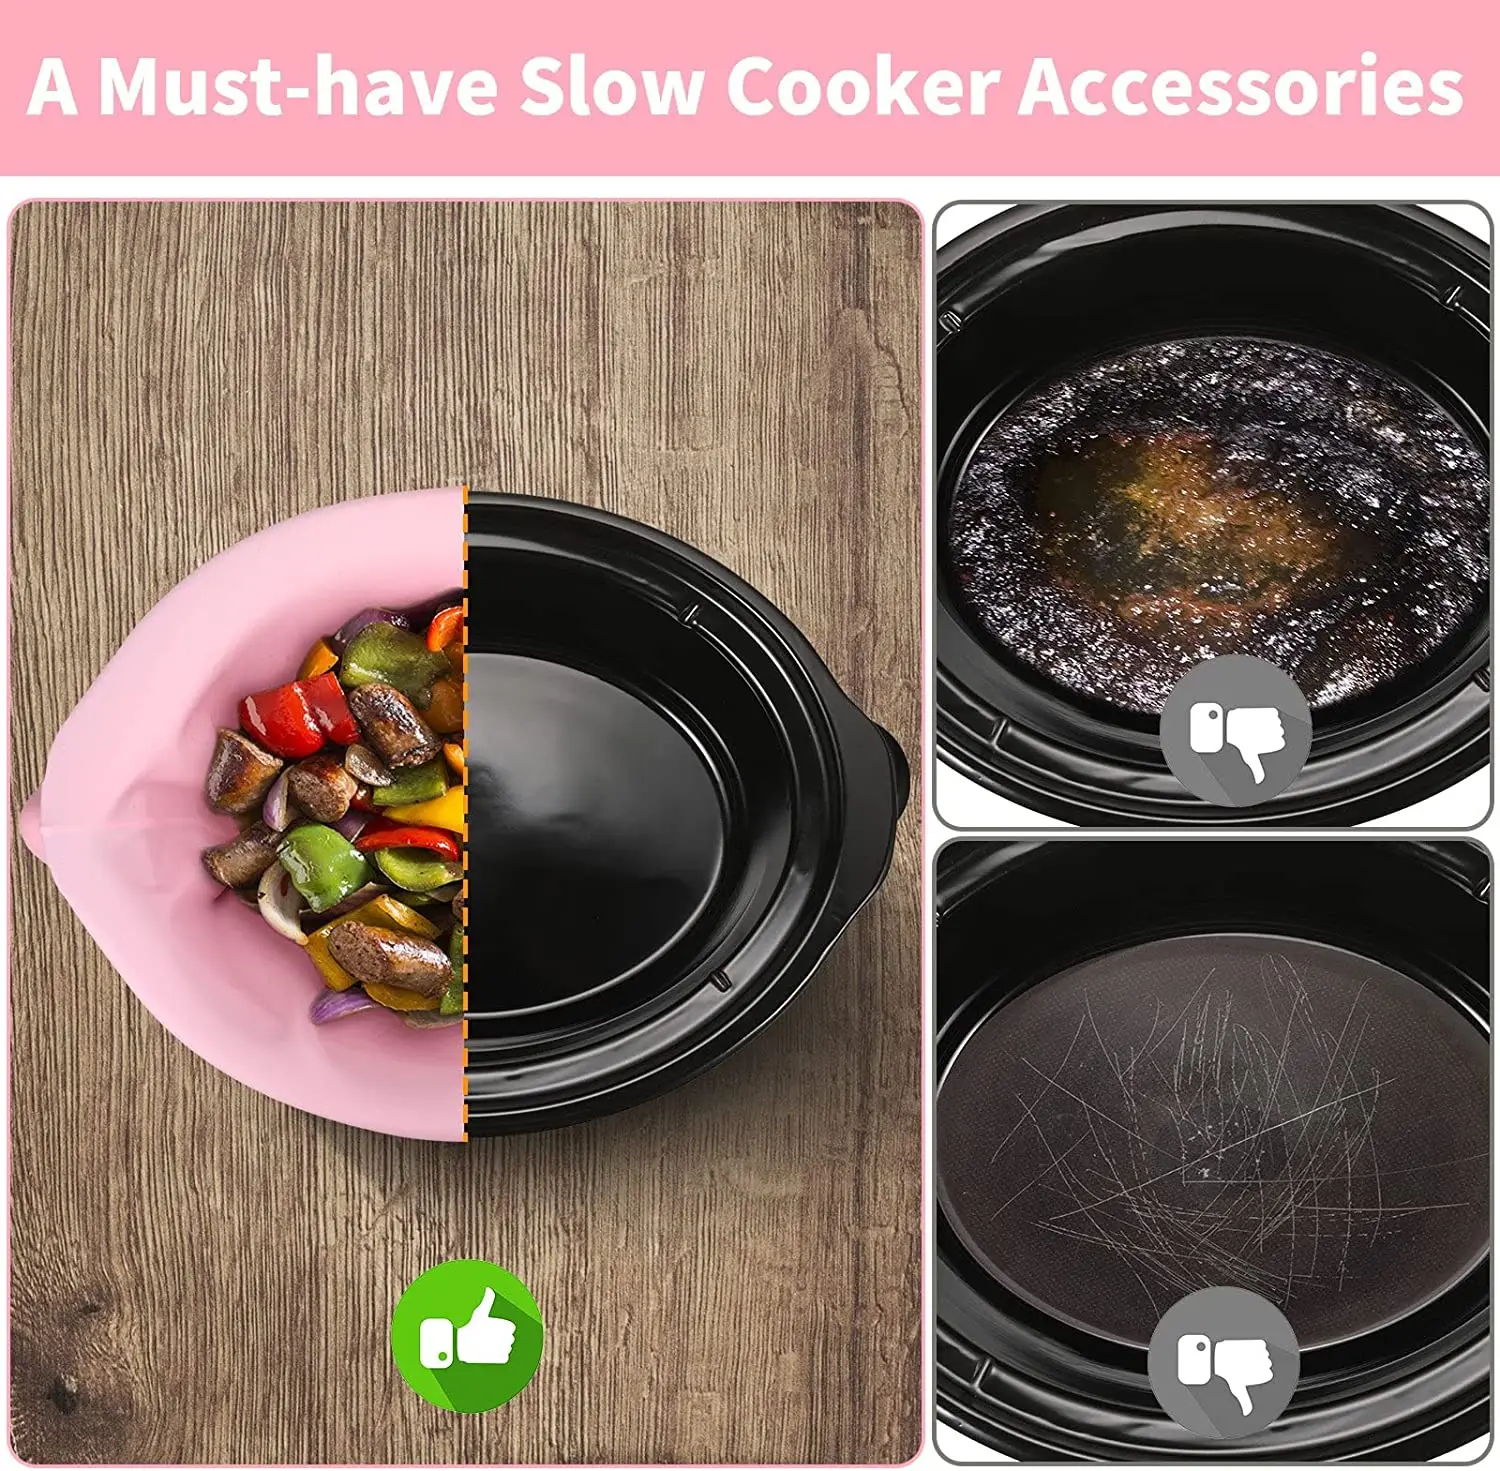 https://ae01.alicdn.com/kf/Saab459601f554d24b3c3e3b41c3a6d38E/Silicone-Slow-Cooker-Liners-Reusable-Fit-6-8-Quarts-Crockpot-Leakproof-Easy-Clean-Bags-Liners-Oval.jpg